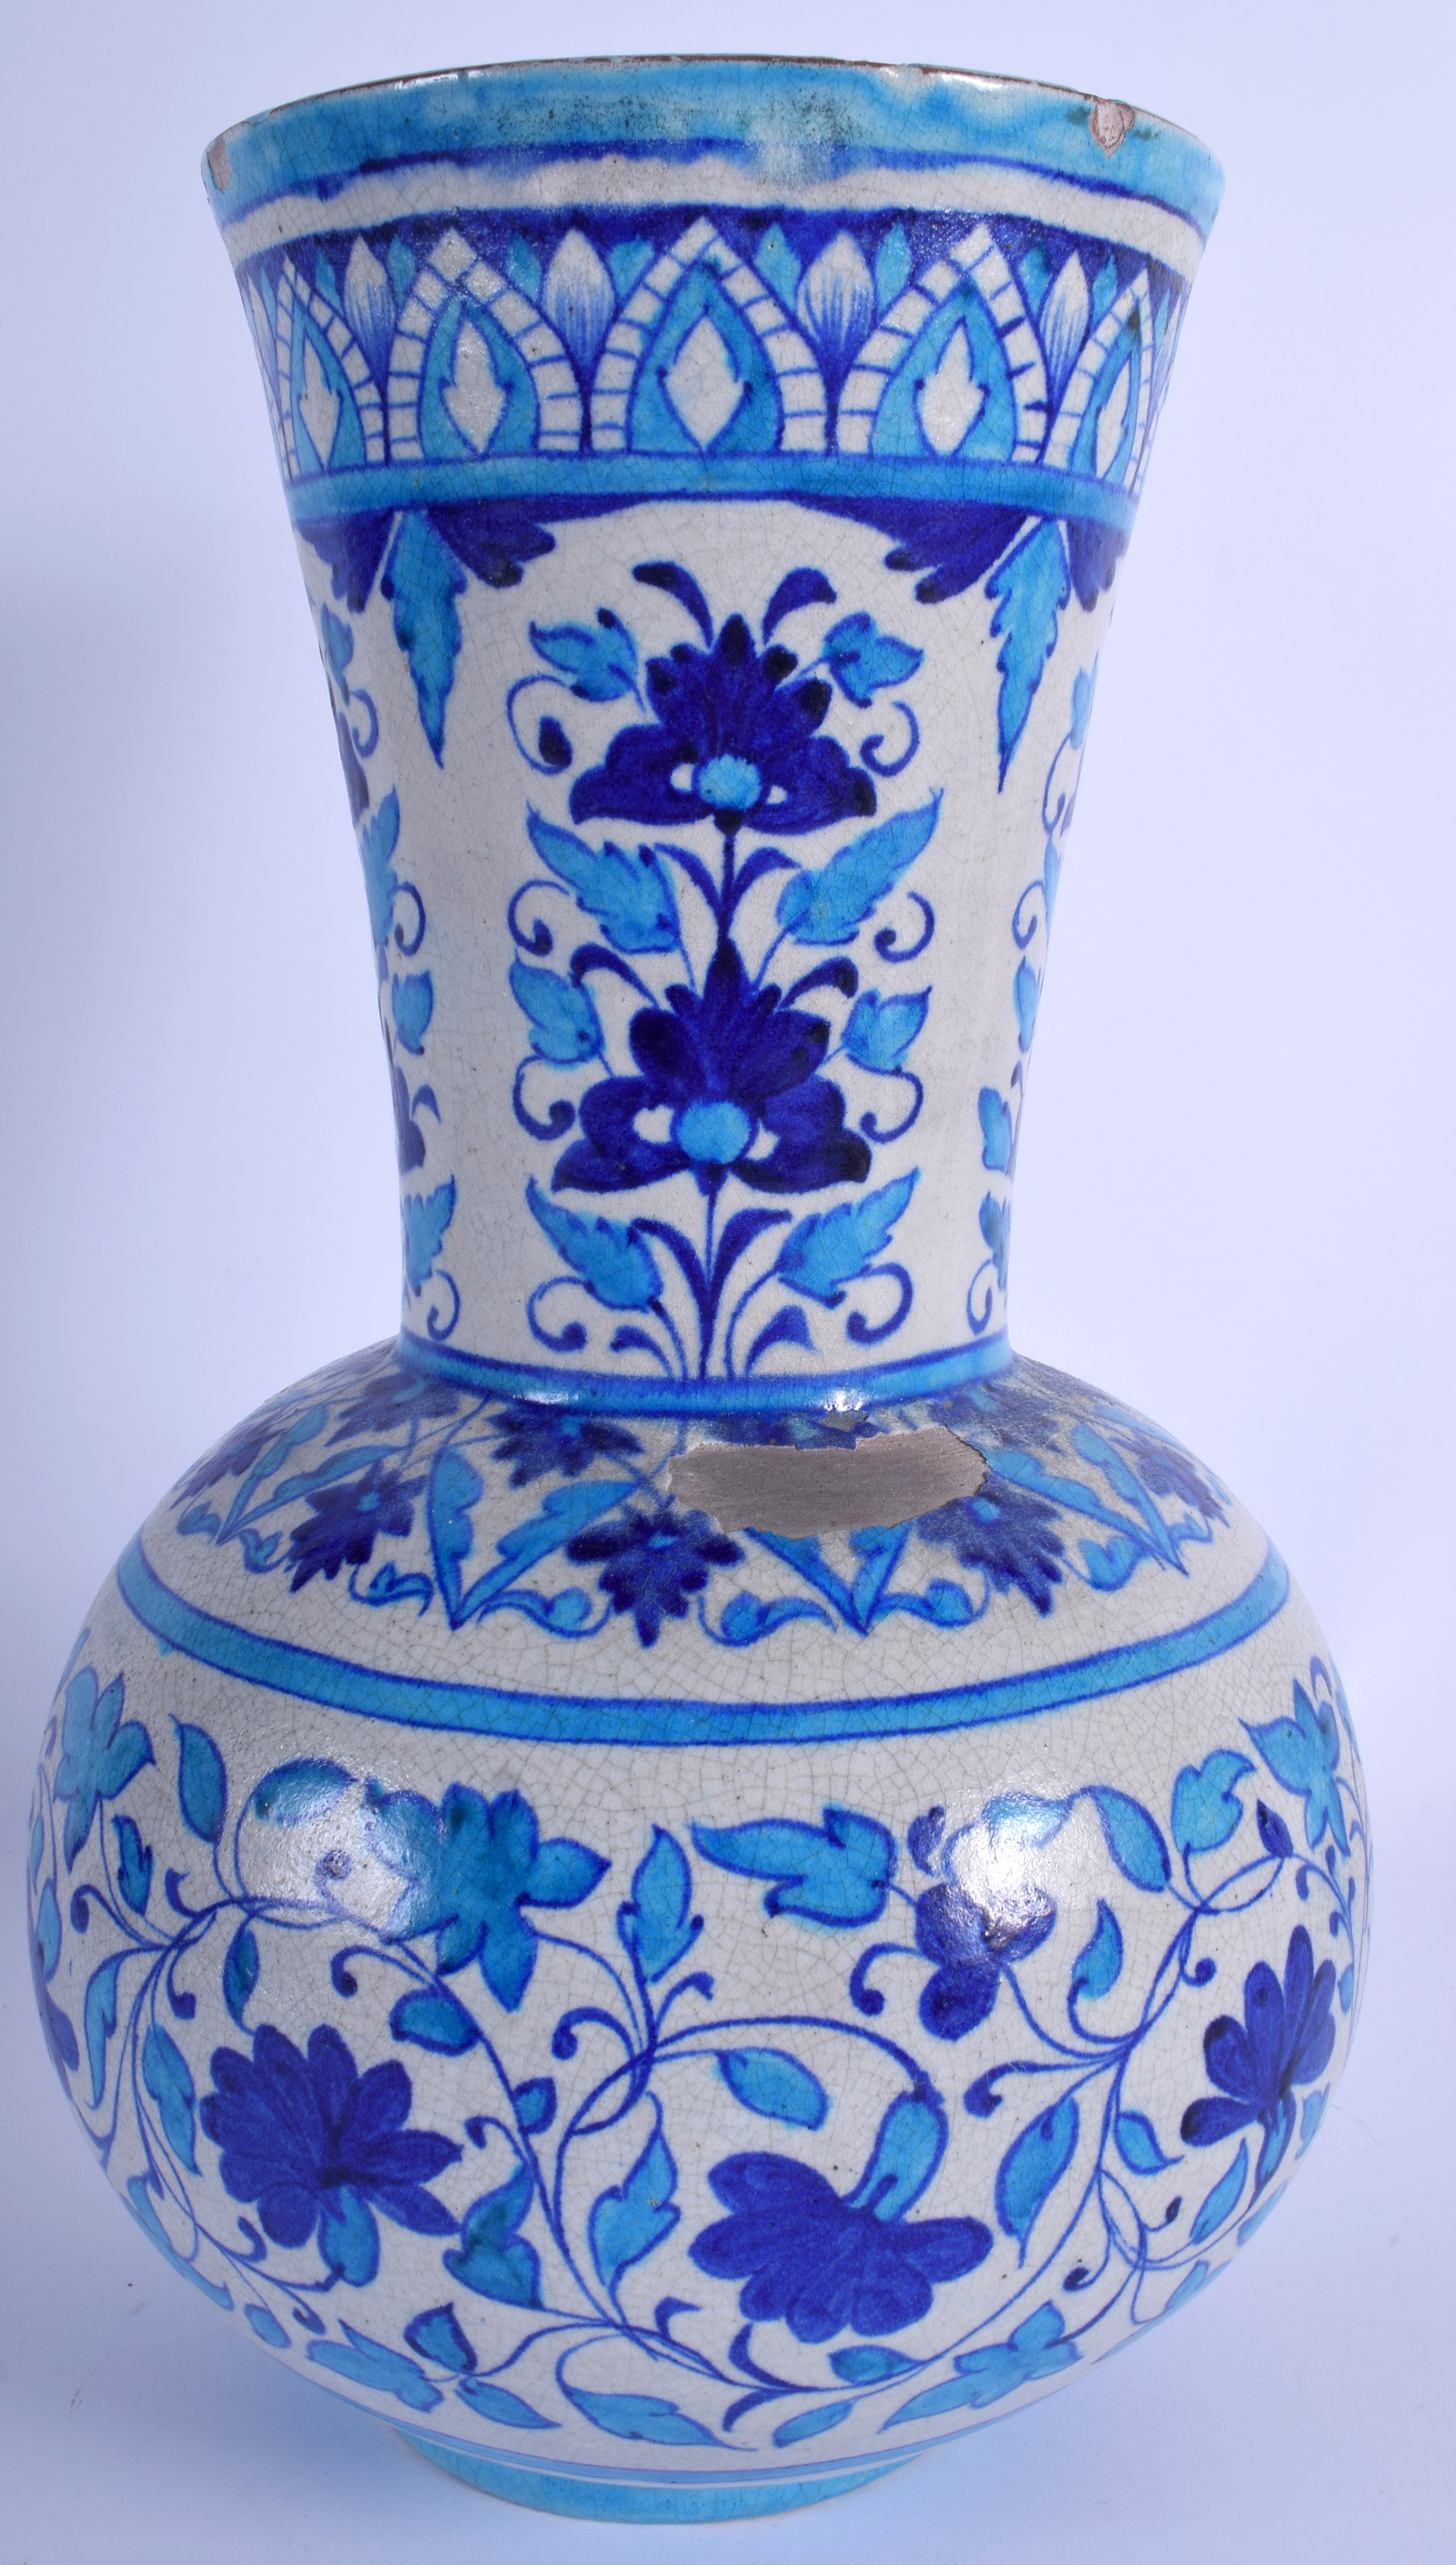 A LARGE PERSIAN MIDDLE EASTERN ISLAMIC FAIENCE BLUE VASE painted with flowers. 34 cm high. - Image 3 of 4